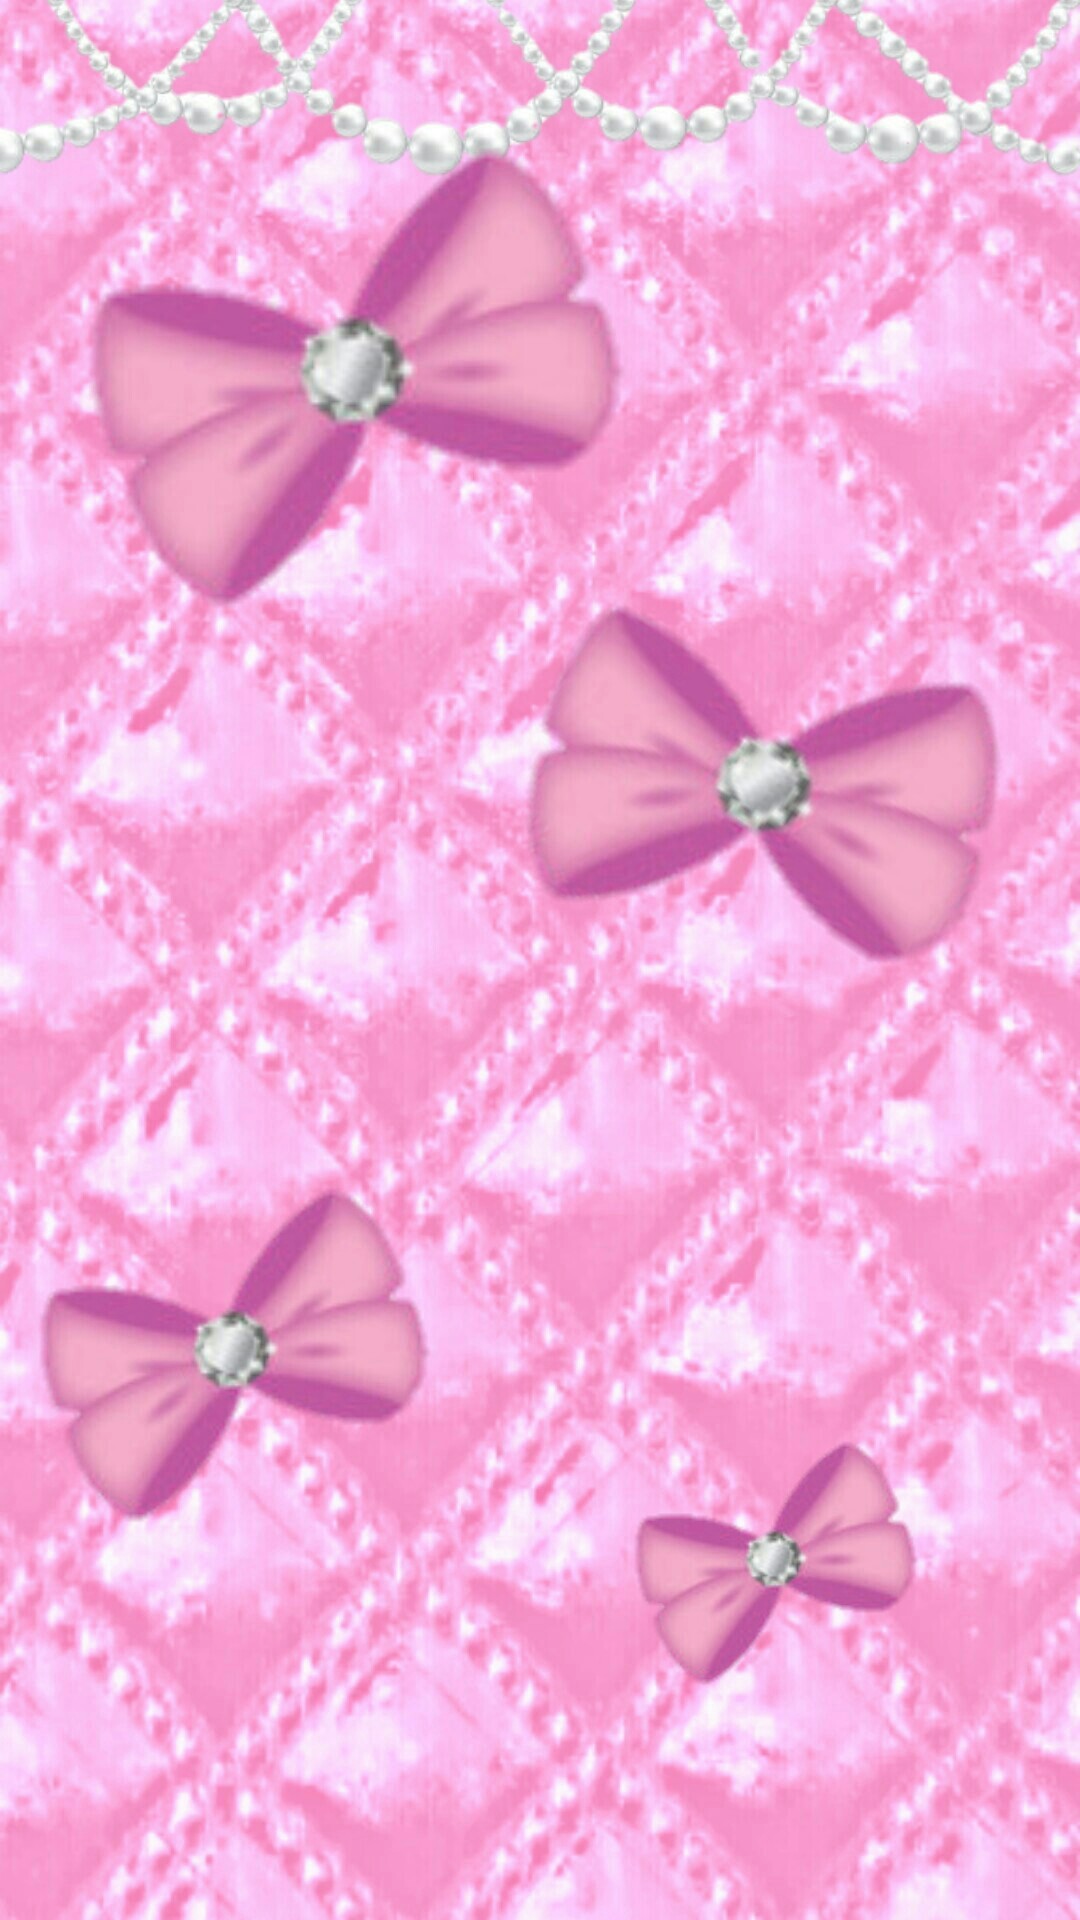 1080x1920 Pink Bows Upholstry and pearls wallpaper background iphone